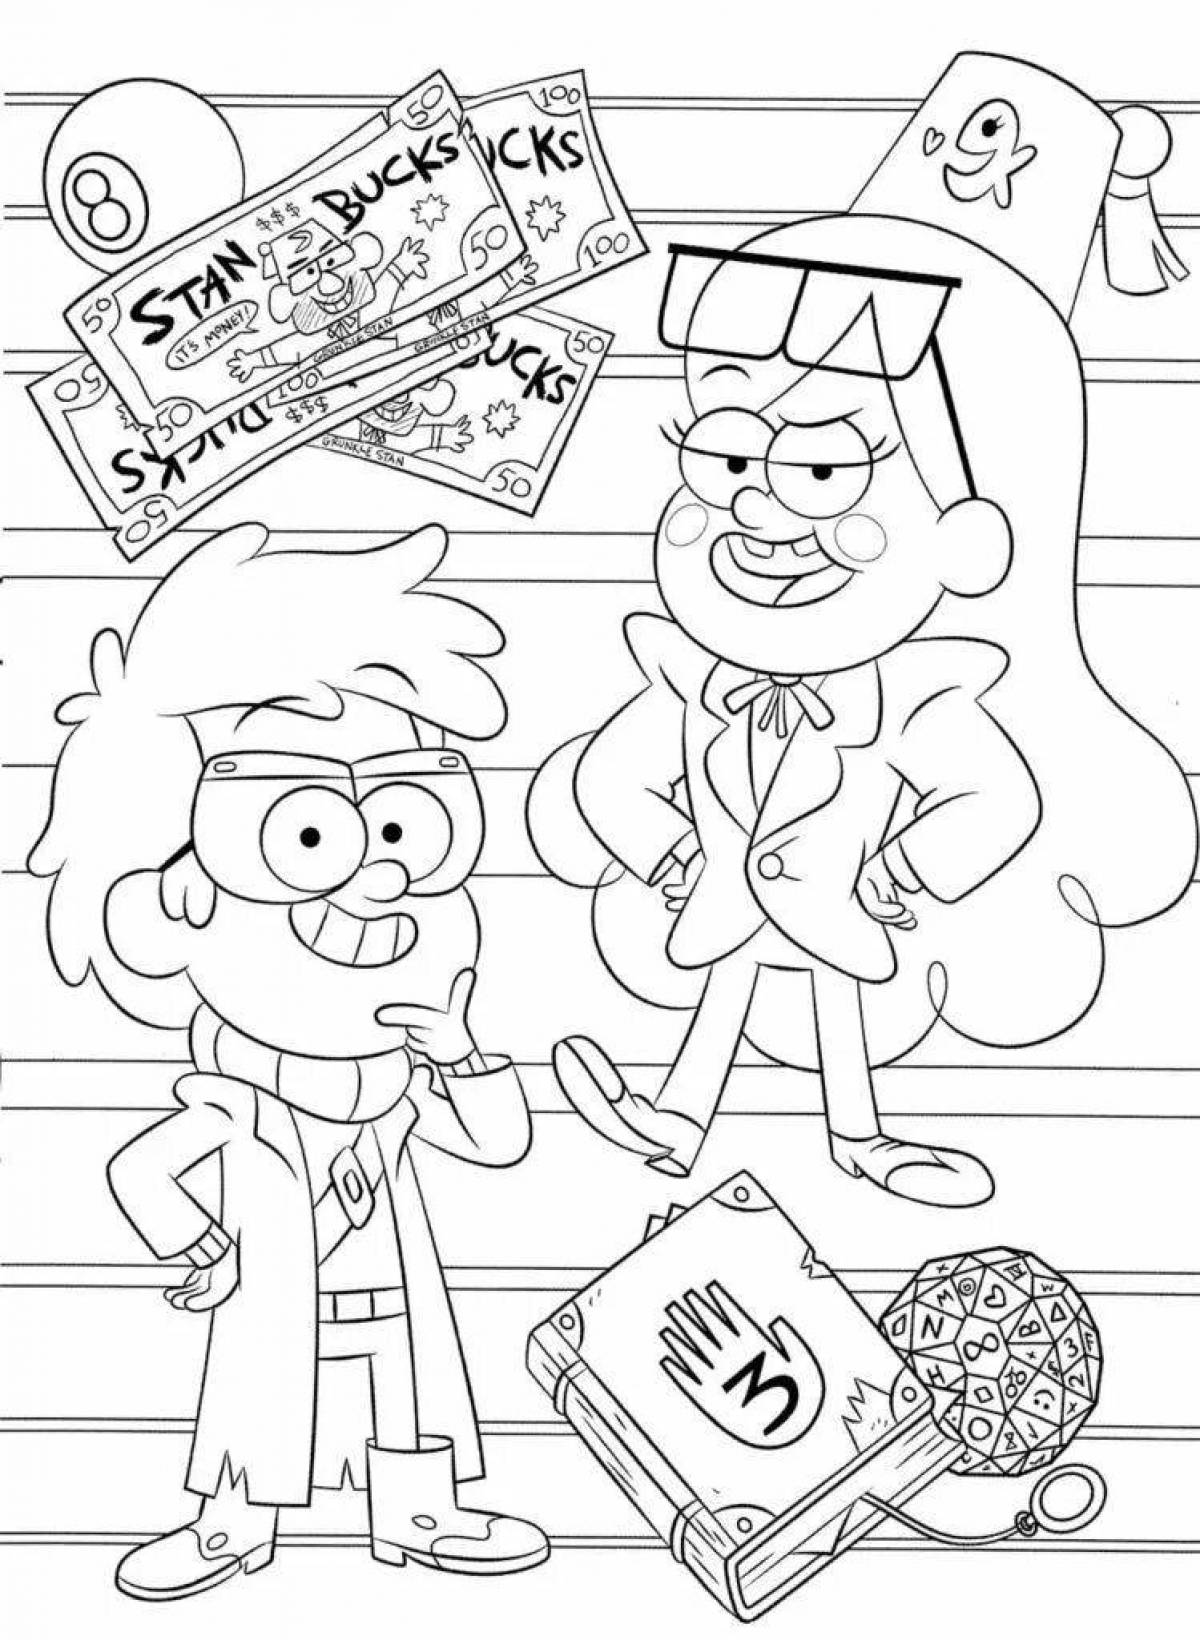 Gravity falls coloring page